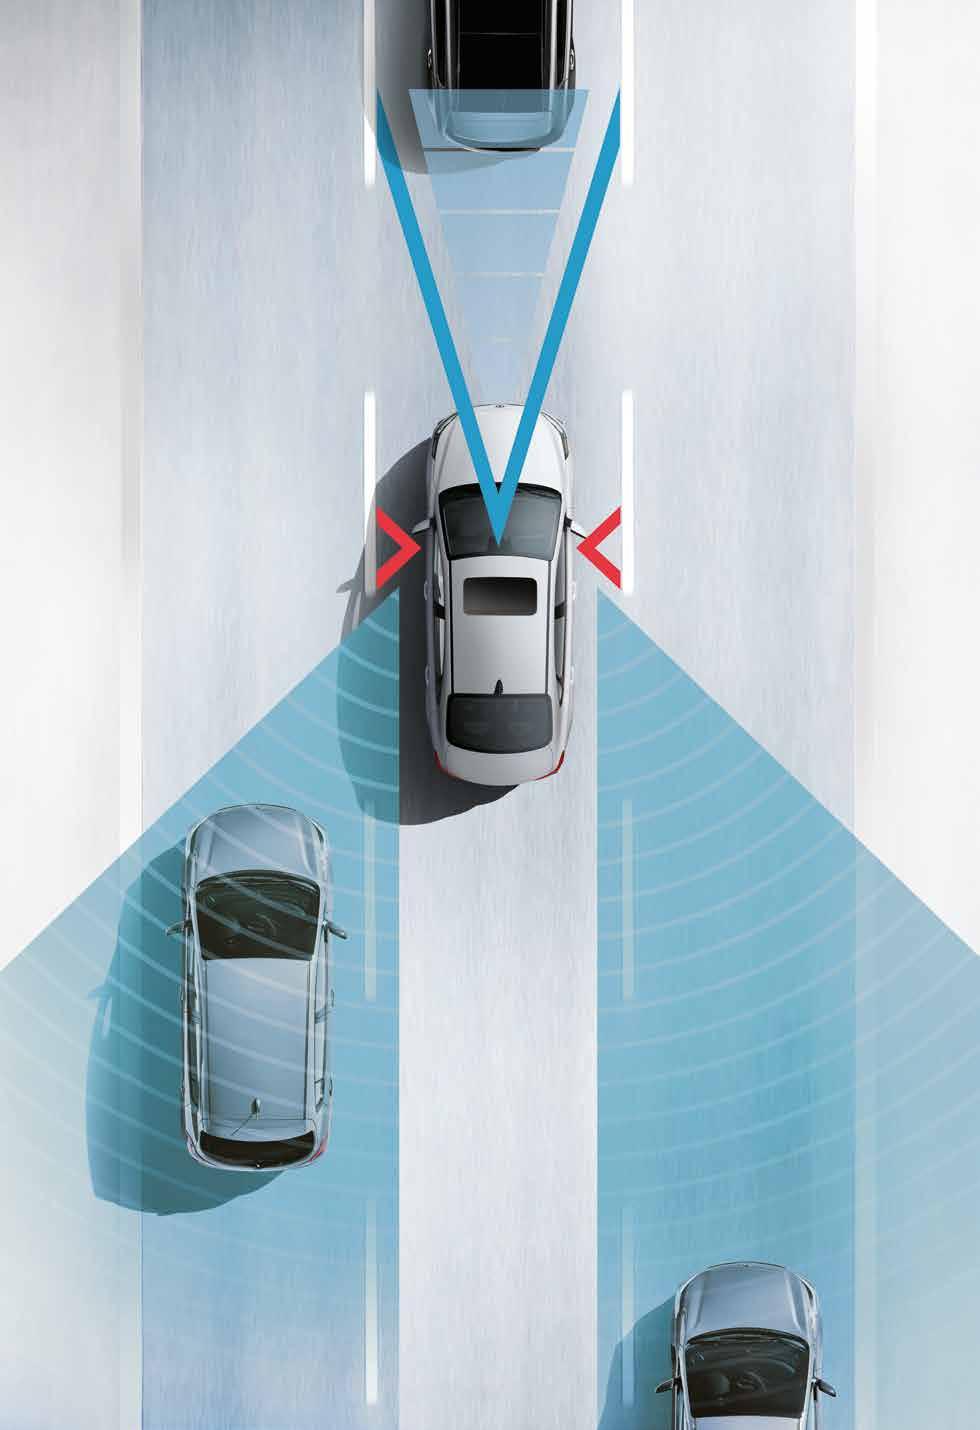 KIA.CA/FORTE DRIVING ASSISTANCE Helping you REMAIN CENTRED amid the chaos of life LANE KEEPING ASSIST* 1 alerts when your vehicle gets close to lane markers, and can apply corrective adjustments to